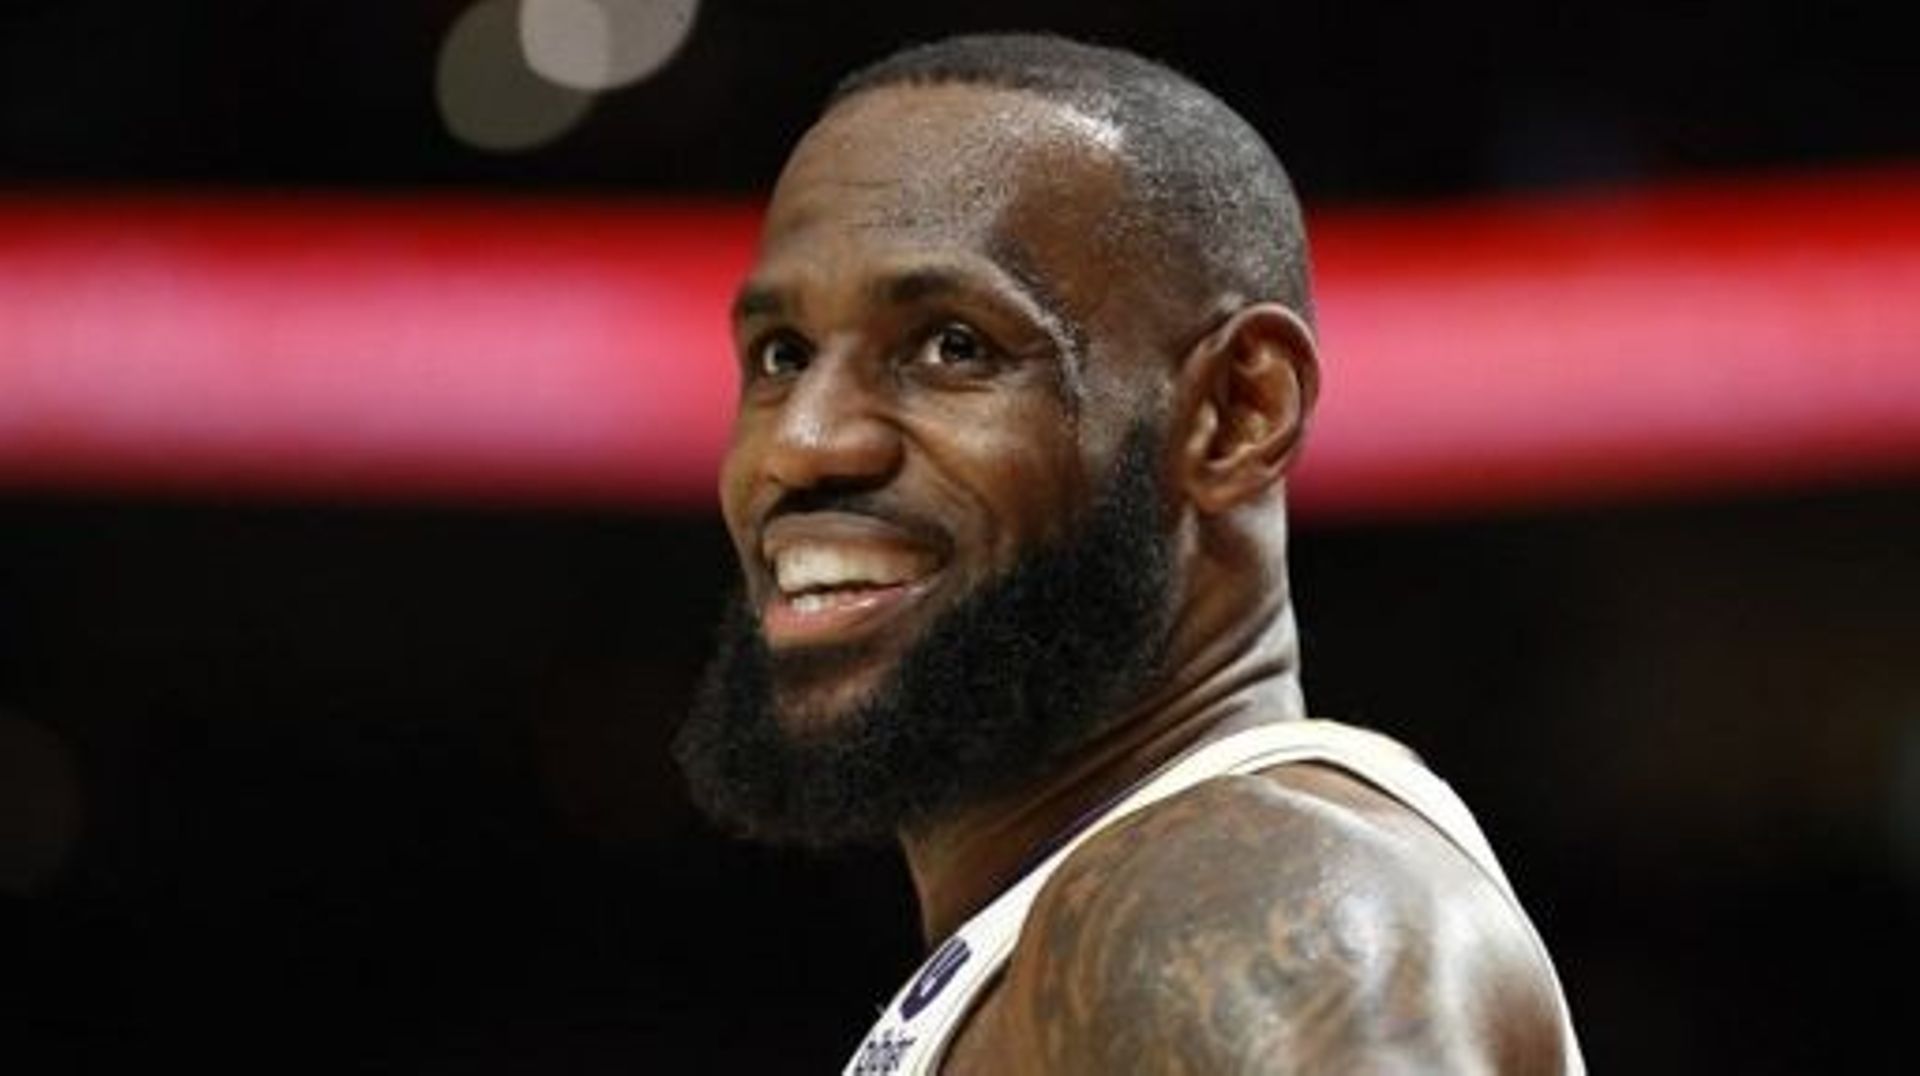 (FILES) In this file photo taken on January 22, 2023 LeBron James #6 of the Los Angeles Lakers reacts during the third quarter against the Portland Trail Blazers at Moda Center in Portland, Oregon.  February 7, 2023, LeBron James finally eclipsed Kareem A